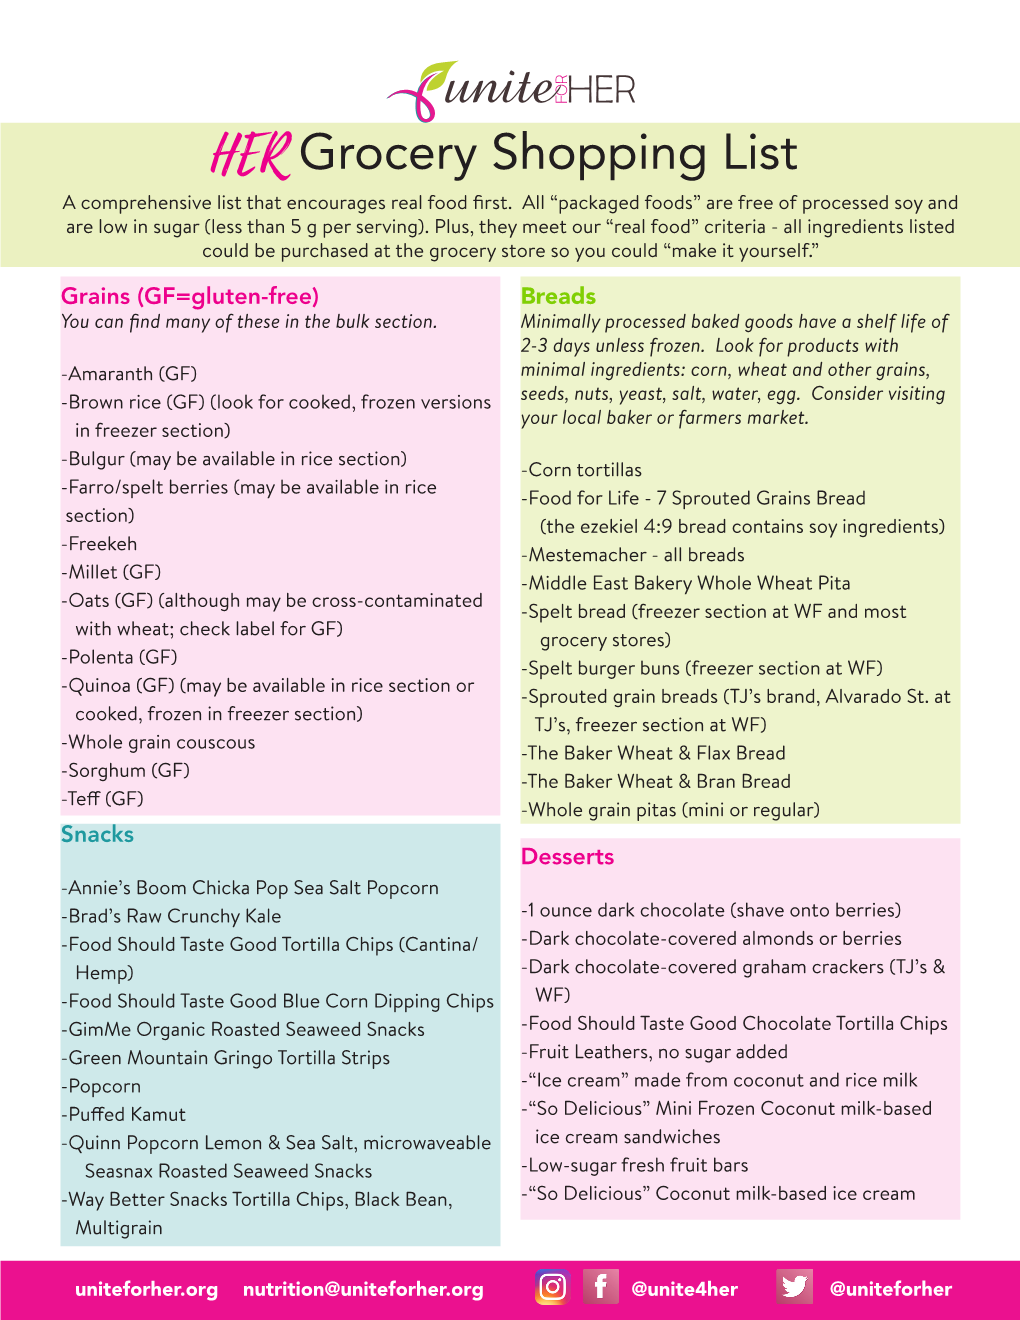 HER Grocery Shopping List a Comprehensive List That Encourages Real Food First